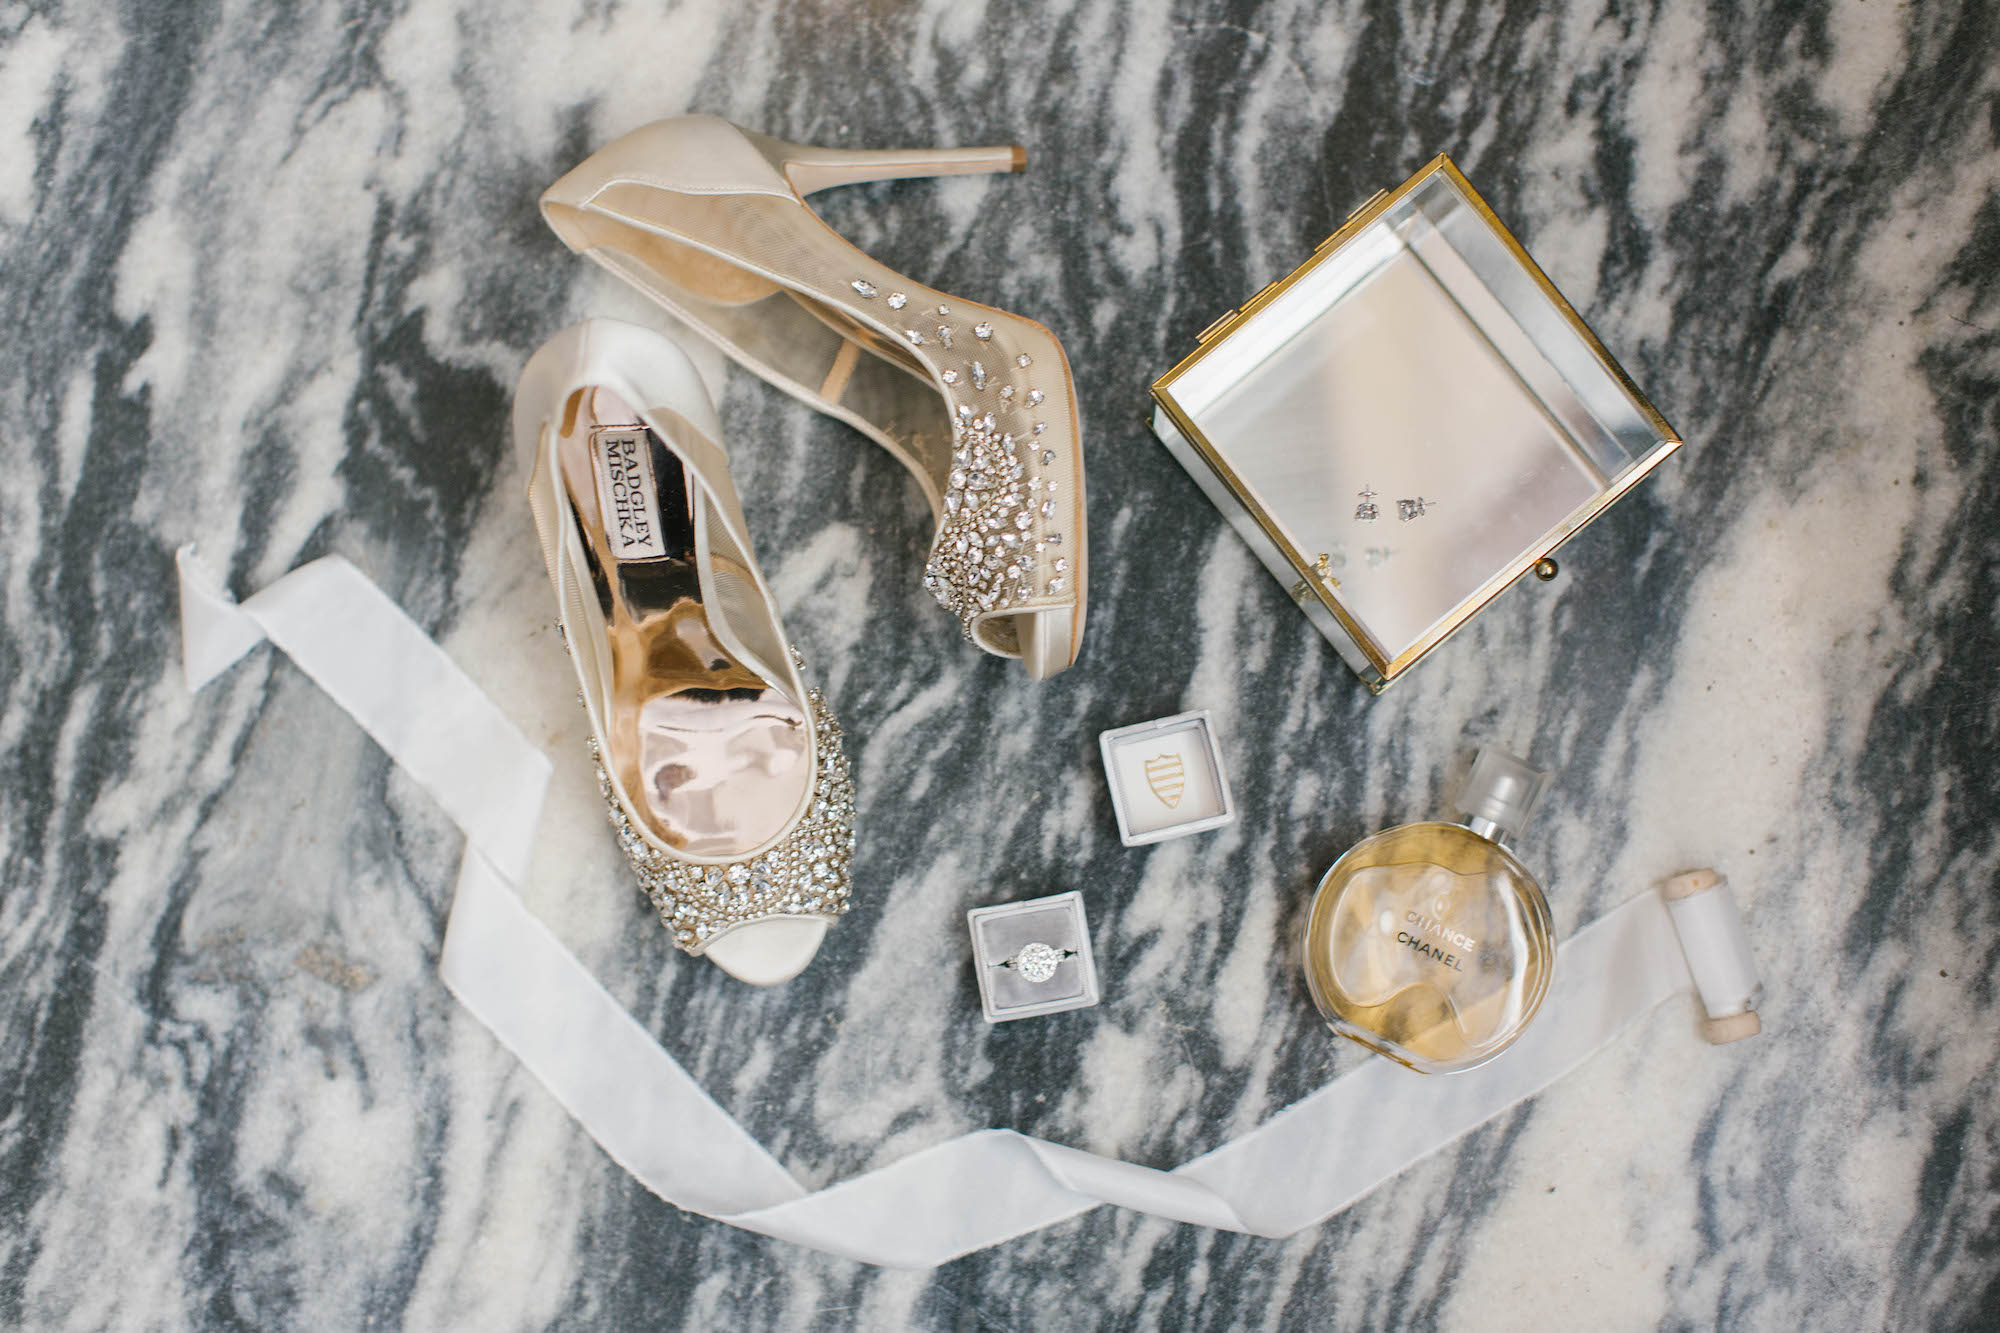 Elegant Wedding Accessories, Bride's Badgley Mischka Ivory, Illusion with Rhinestones Peep Toe Wedding Shoes, Round Diamond Engagement Ring, Perfume Bottle and Clear and Gold Rimmed Jewelry Box